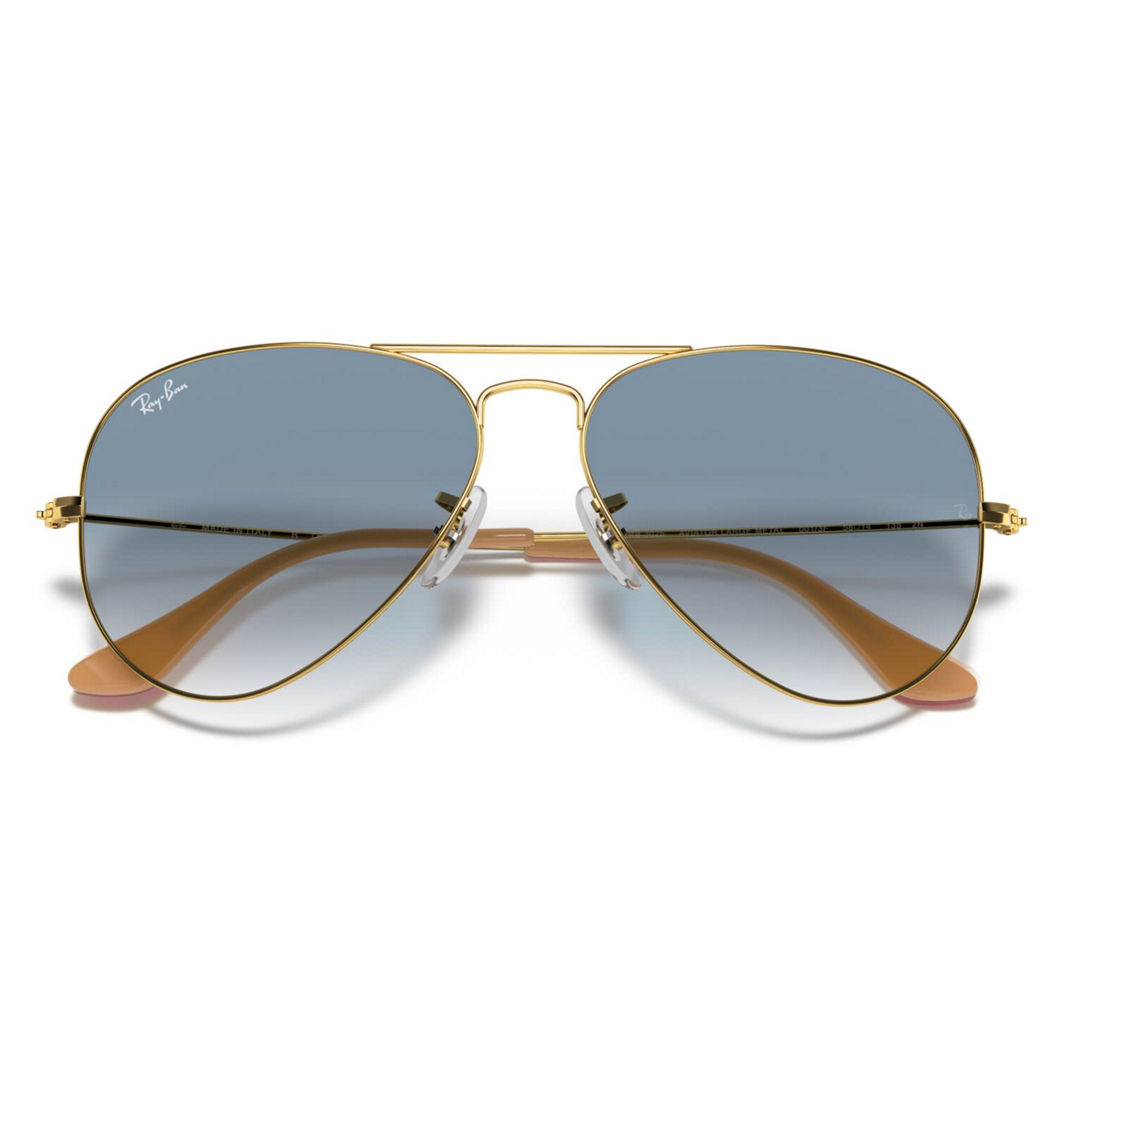 Ray-Ban RB3025 Aviator Gradient - Image 5 of 5